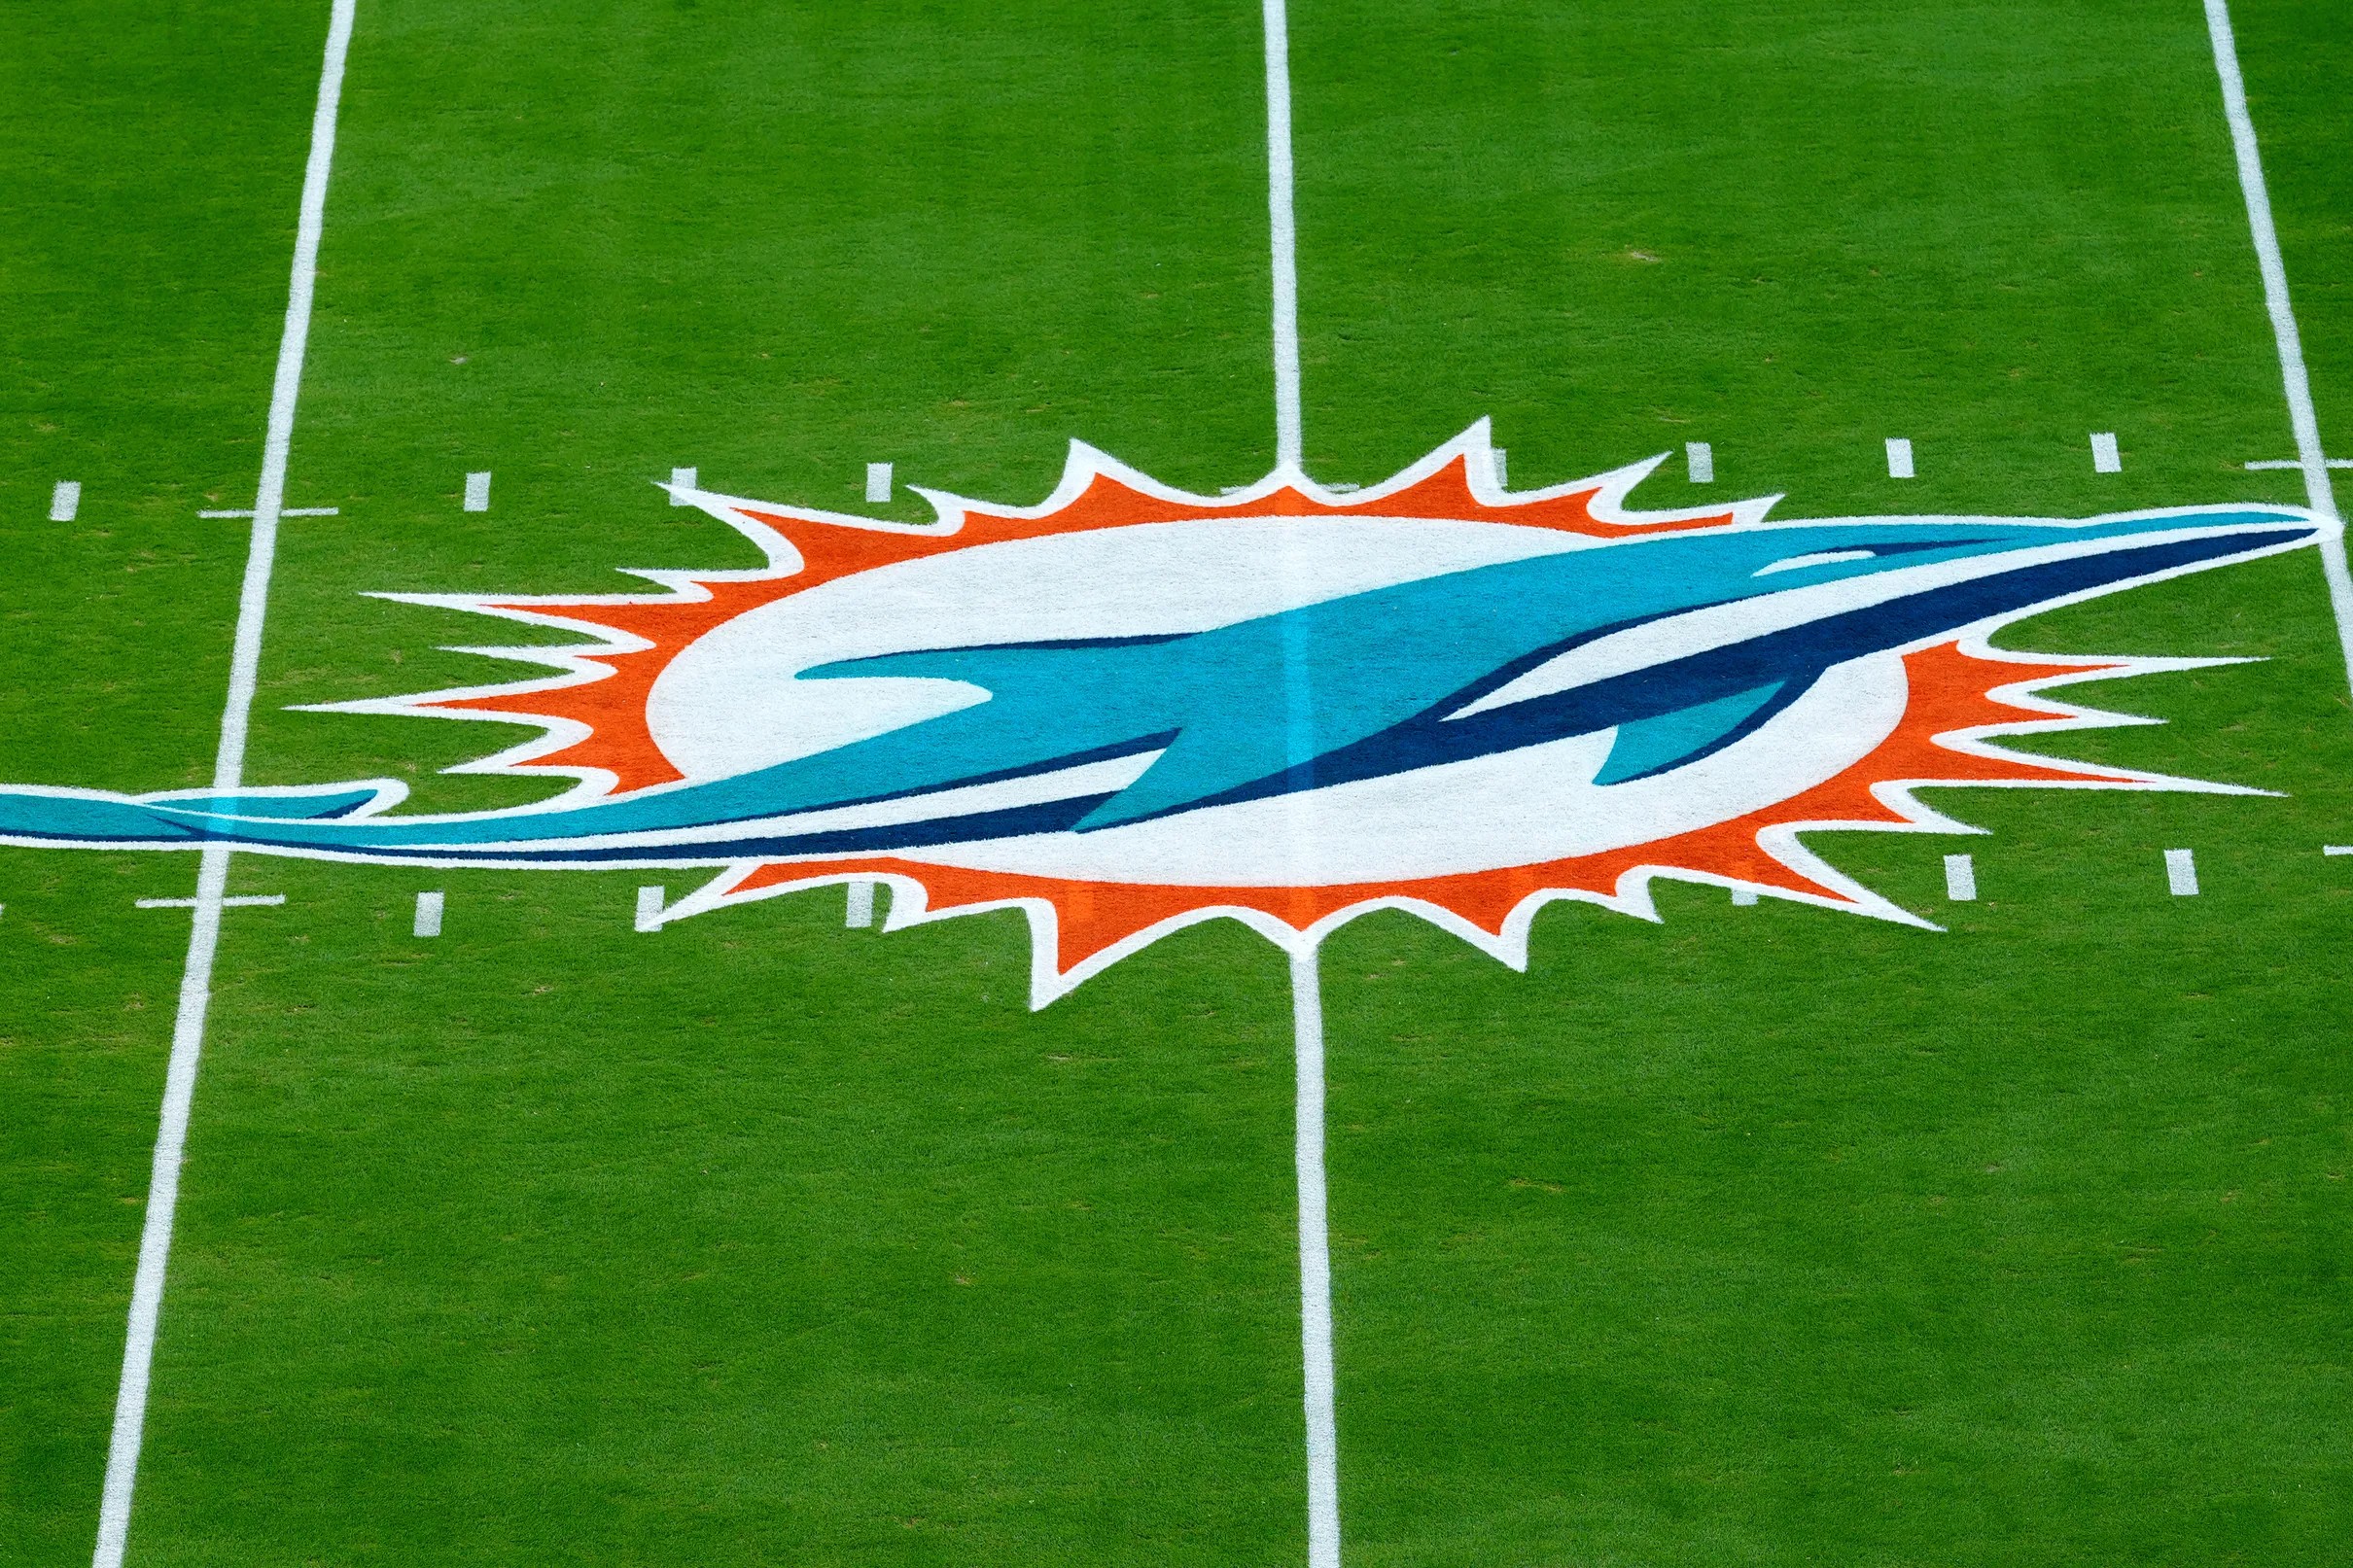 2022 NFL Schedule release Miami Dolphins game days, times